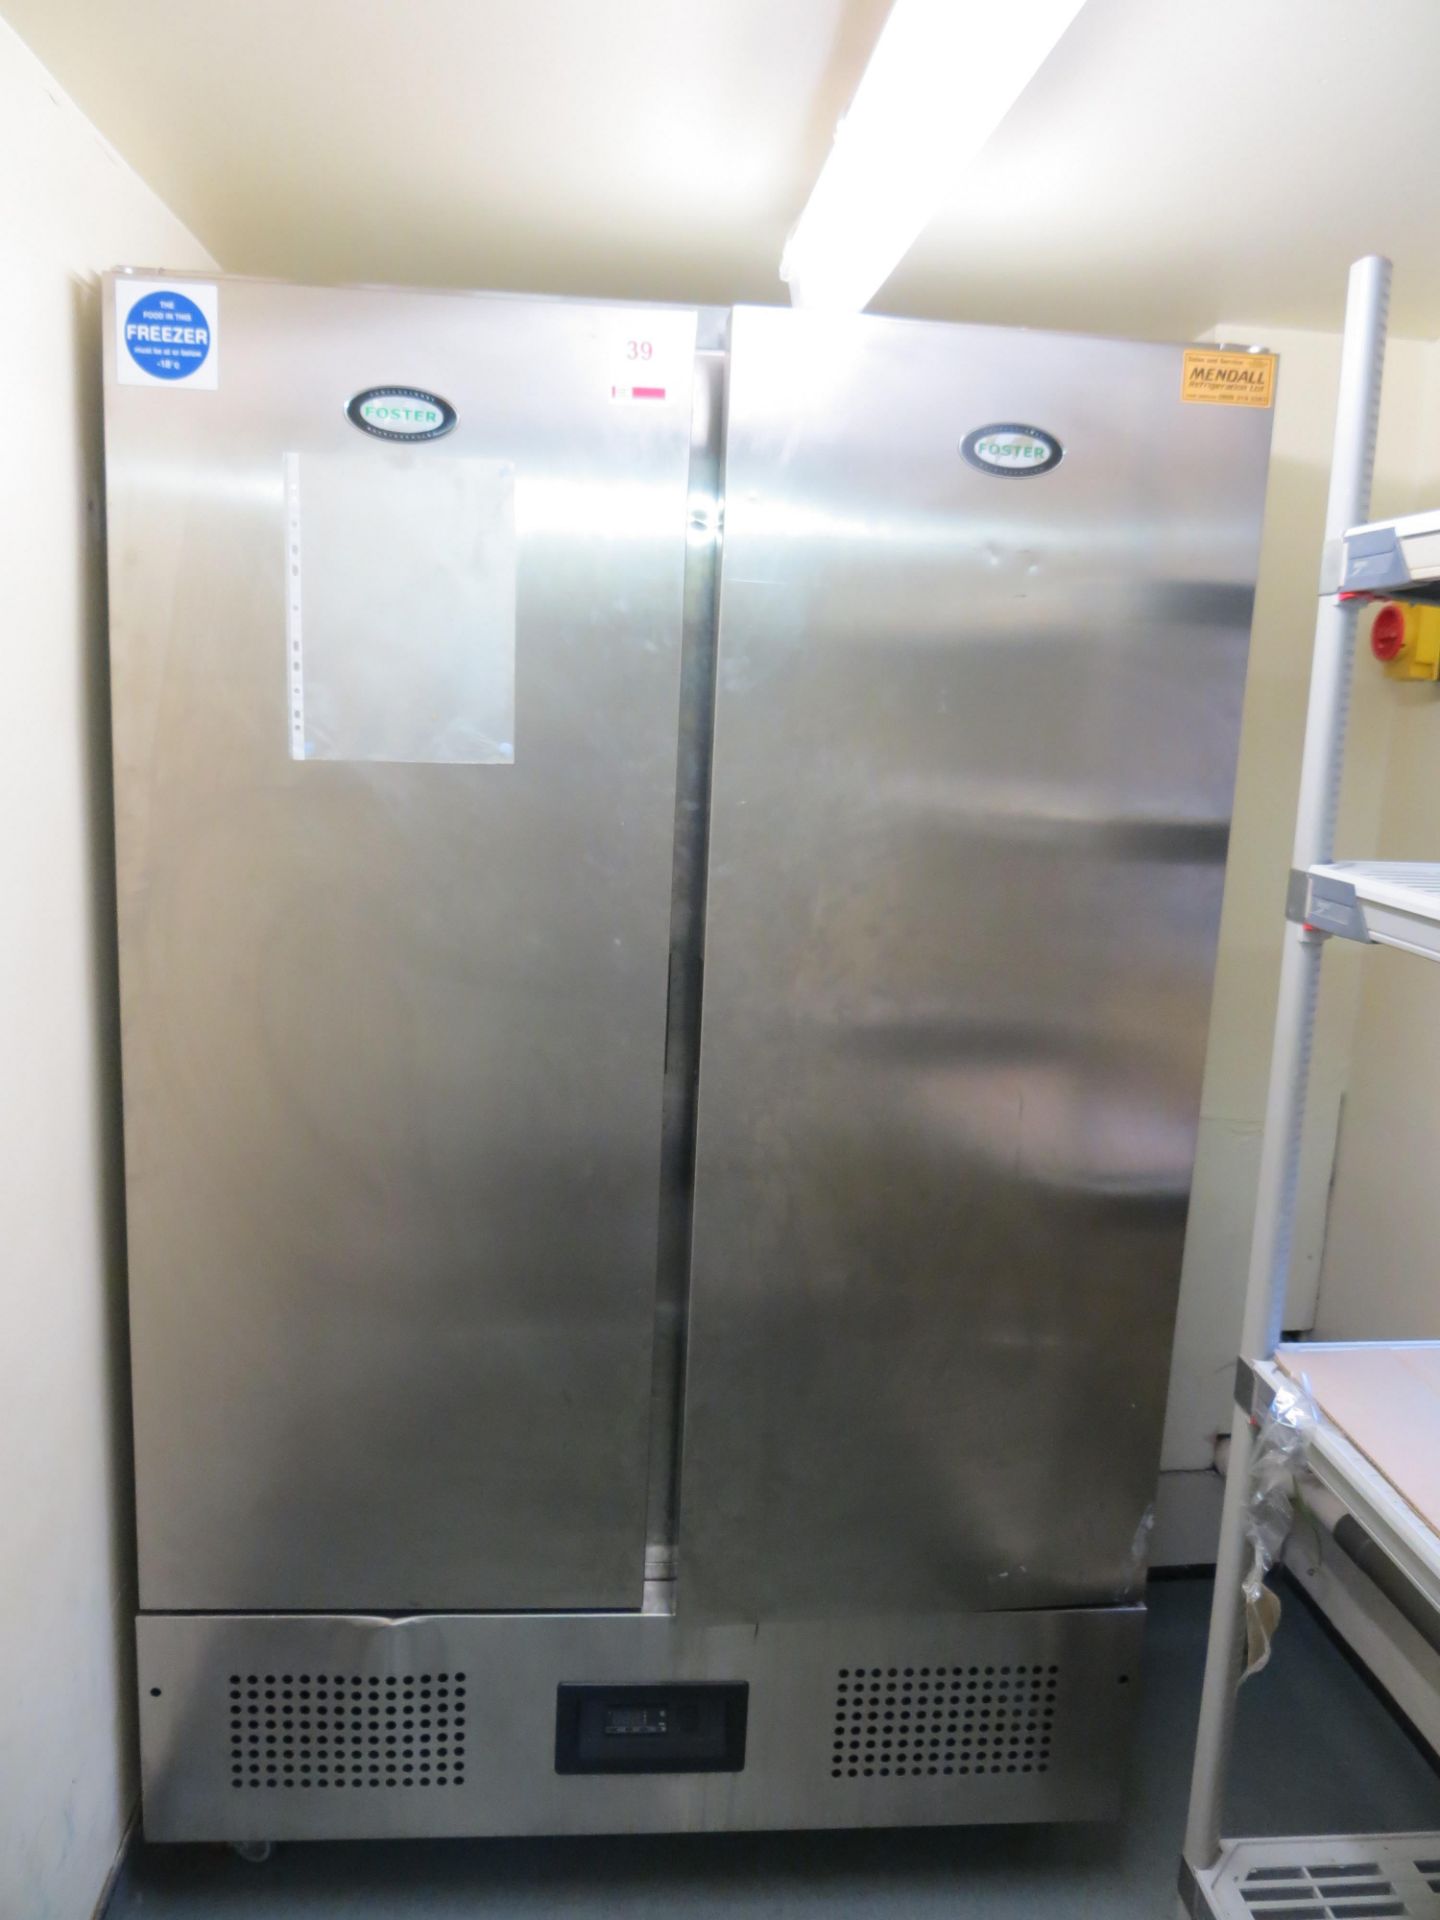 Foster FSL800L mobile 2-door stainless steel upright freezer s/n E5263780